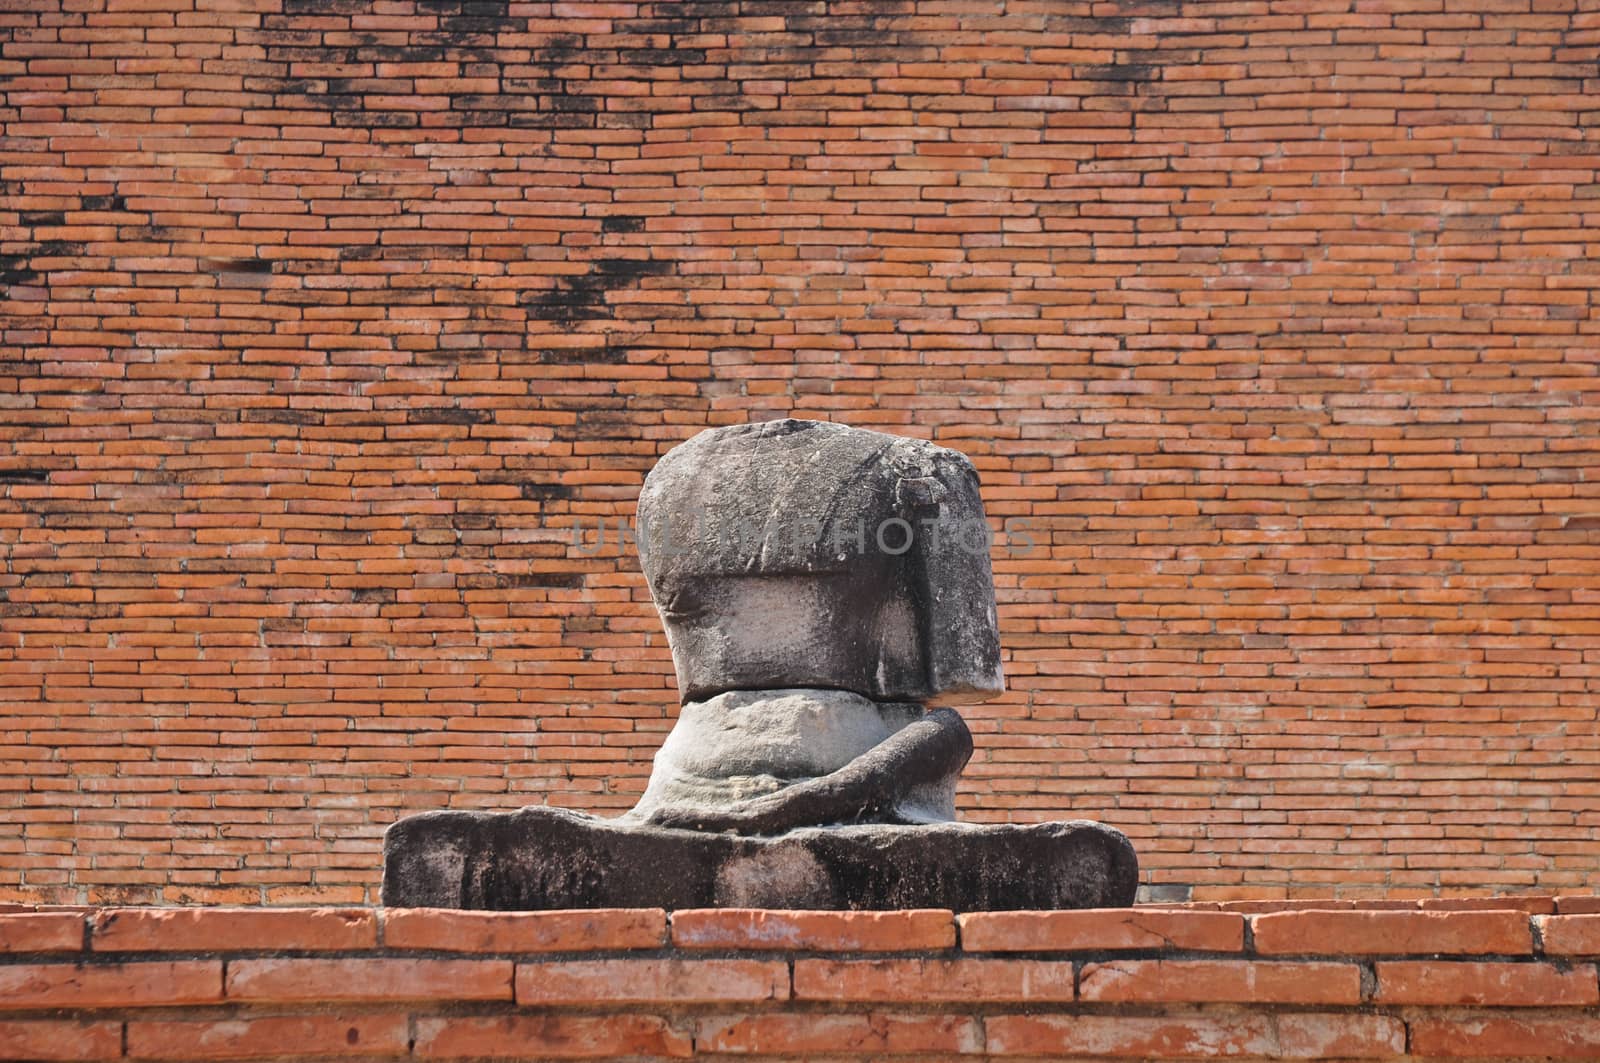 Sitting ancient Buddha statue in Thailand old brick temple by eyeofpaul